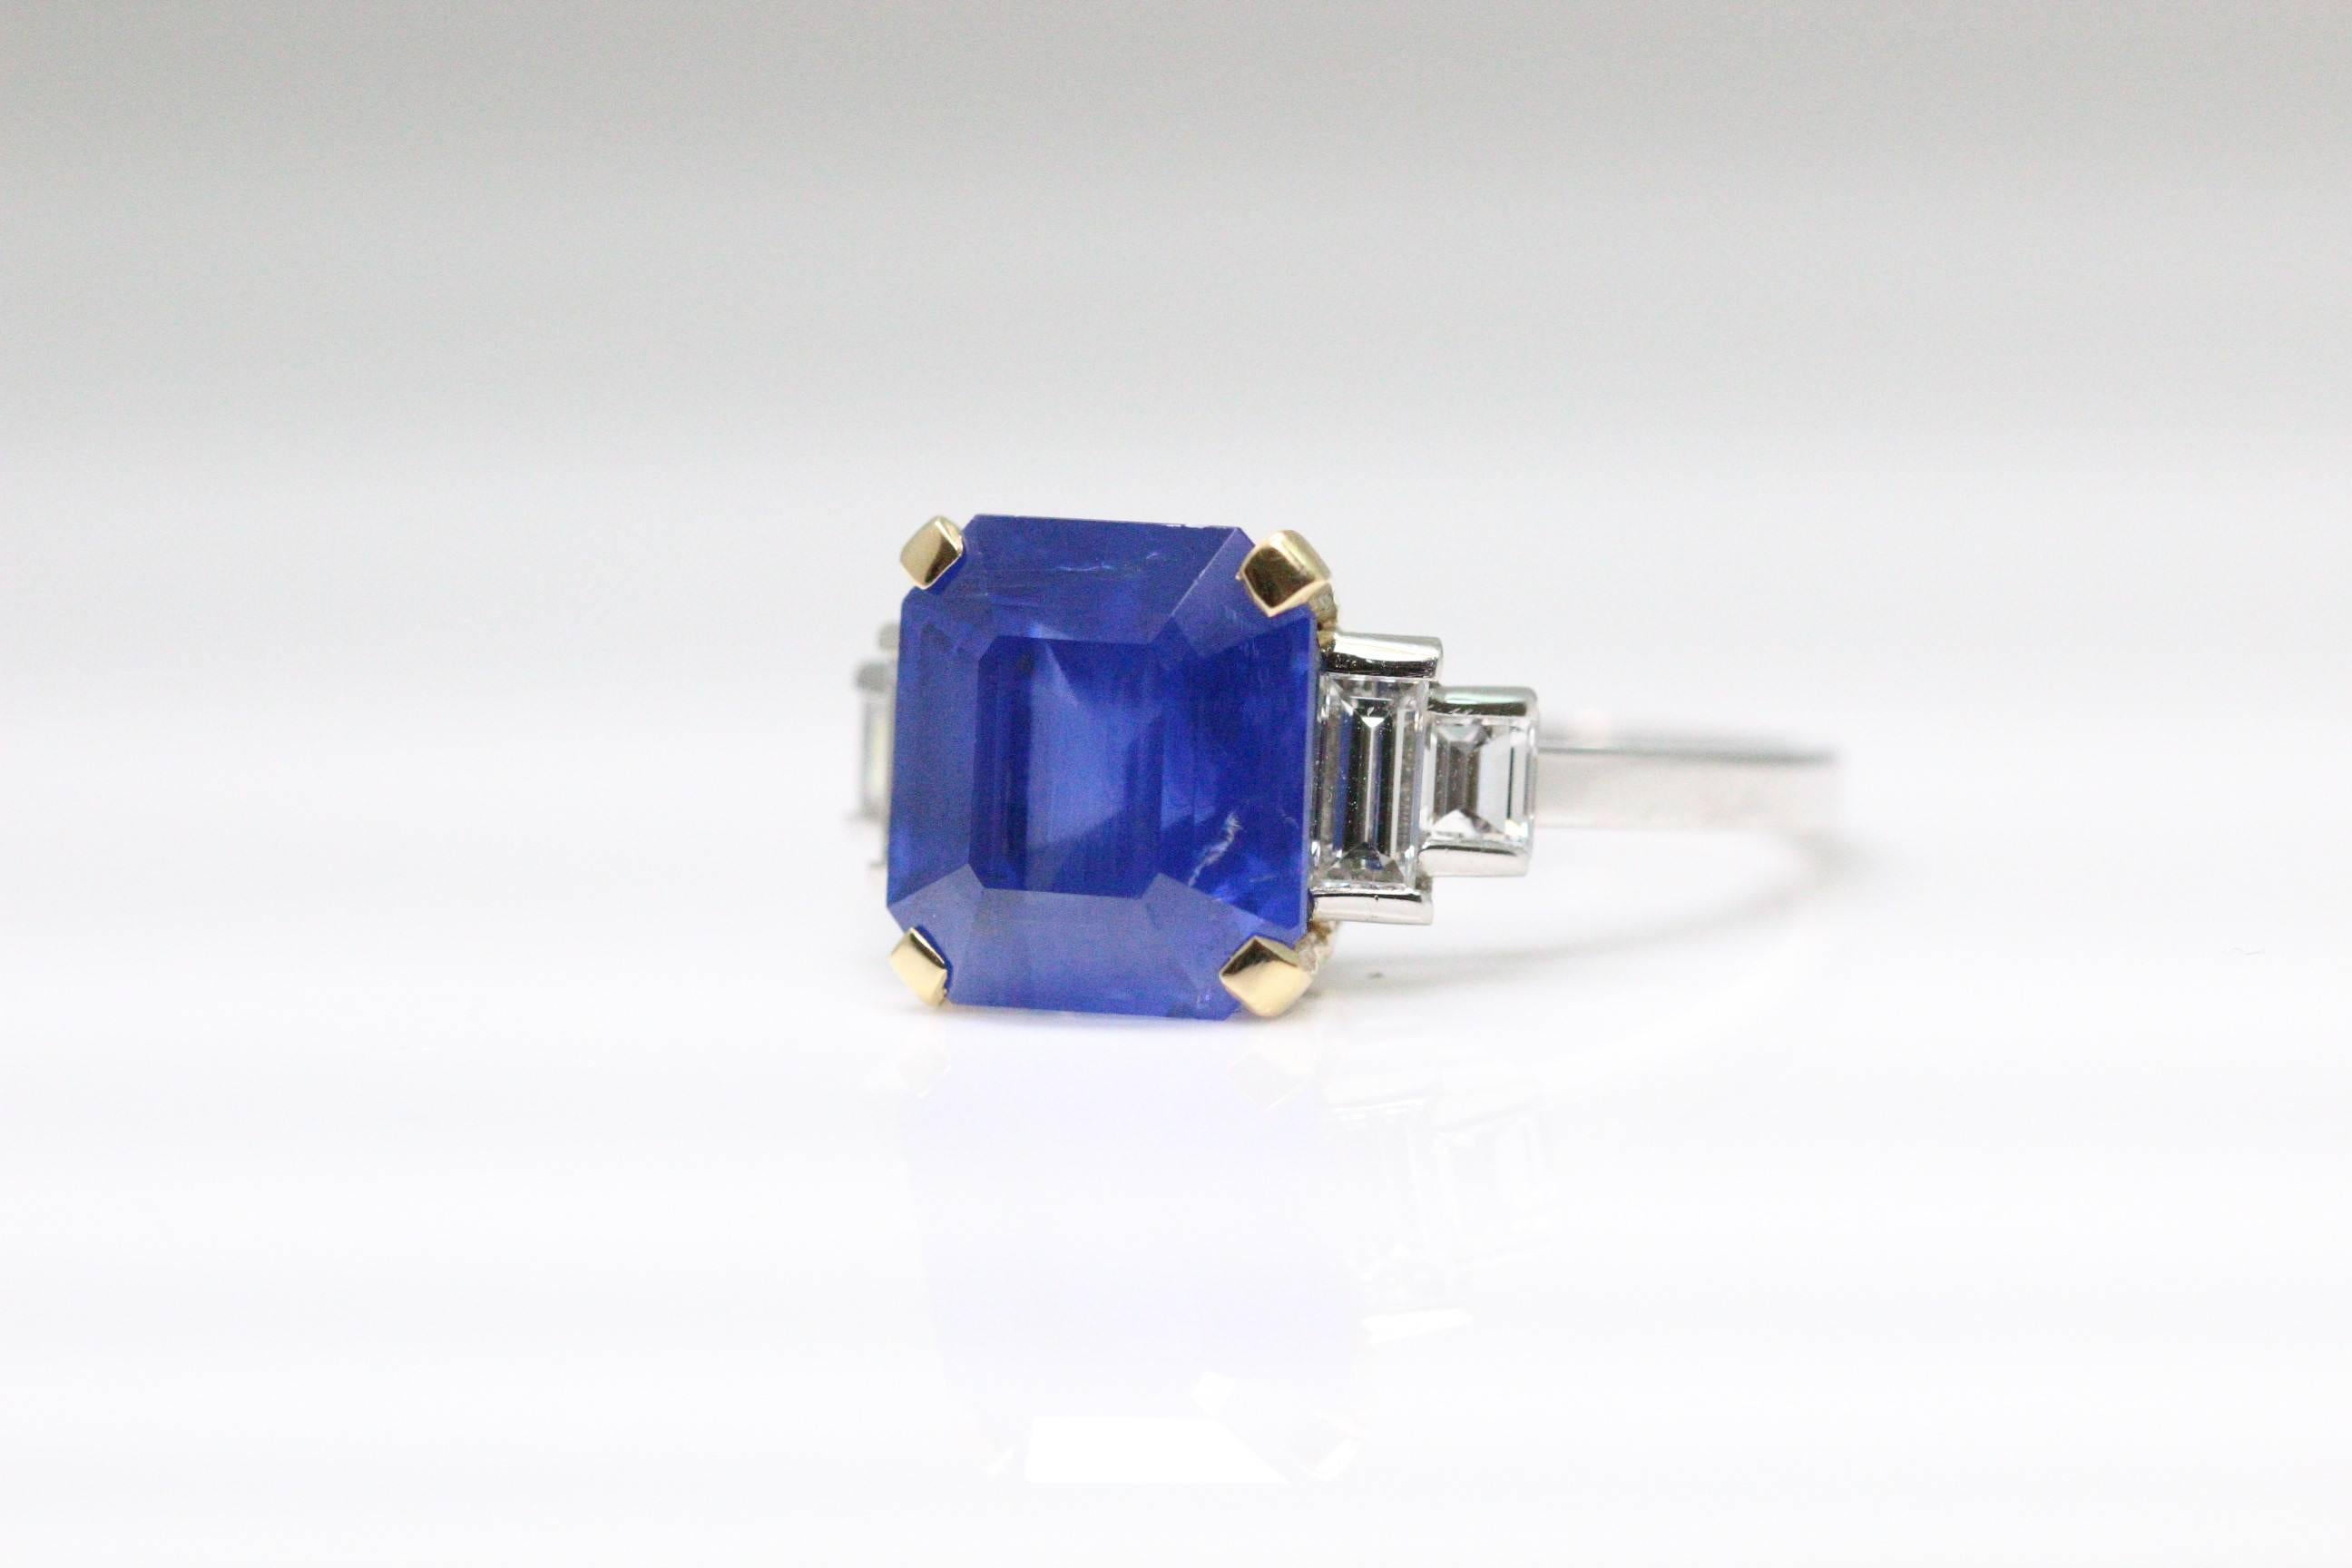 A Bulgari ring mounted with cornflower blue octagon sapphire weighing 6.54 carats, certified by SSEF. The central stone has baguette diamond shoulders leading to a slender shank.  The sapphire is natural and the origin is Sri Lankan.  The ring size